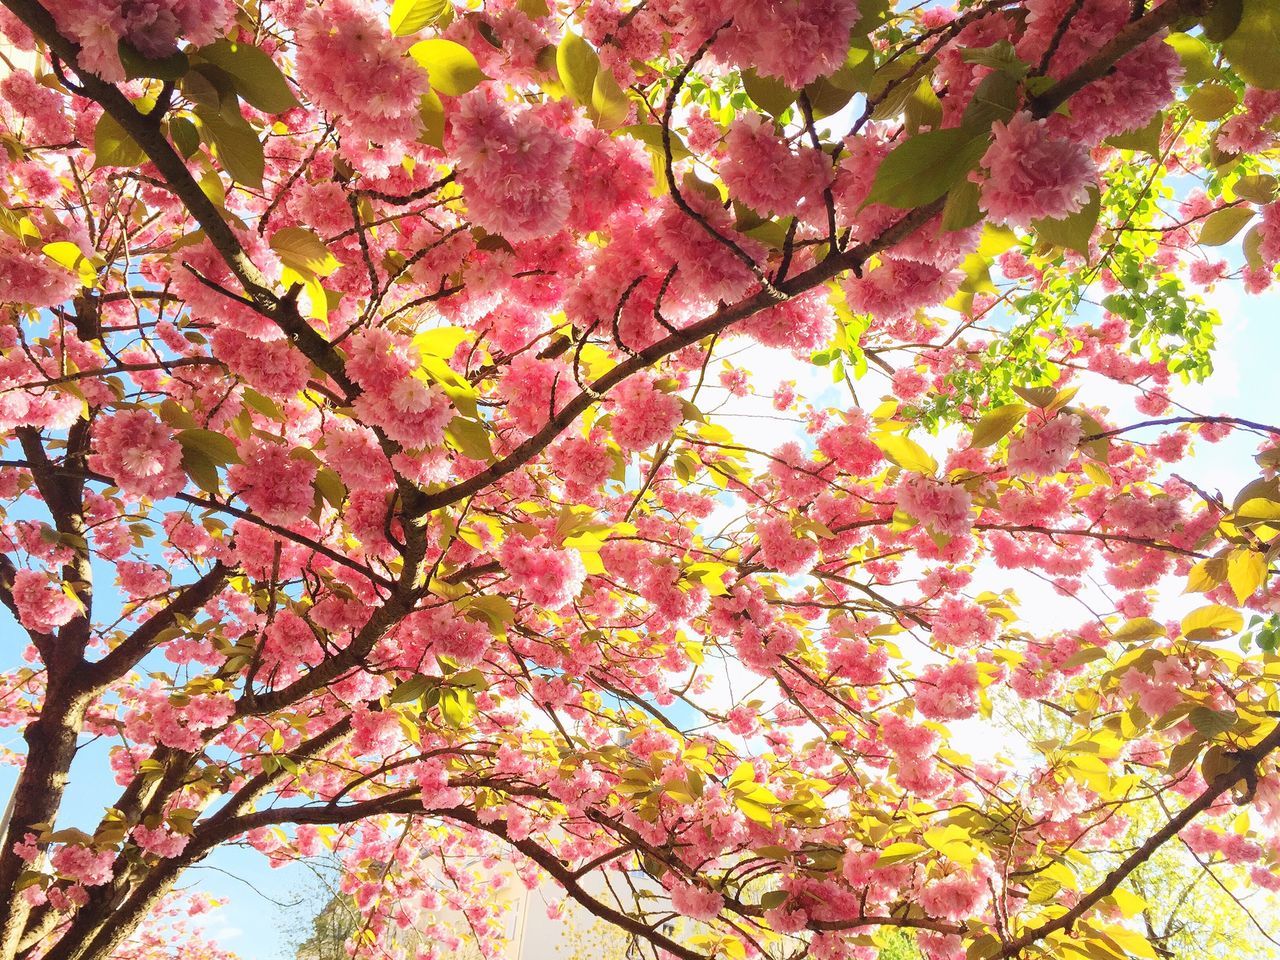 tree, low angle view, branch, growth, beauty in nature, nature, flower, freshness, blossom, tranquility, backgrounds, autumn, sky, pink color, full frame, season, day, outdoors, change, no people